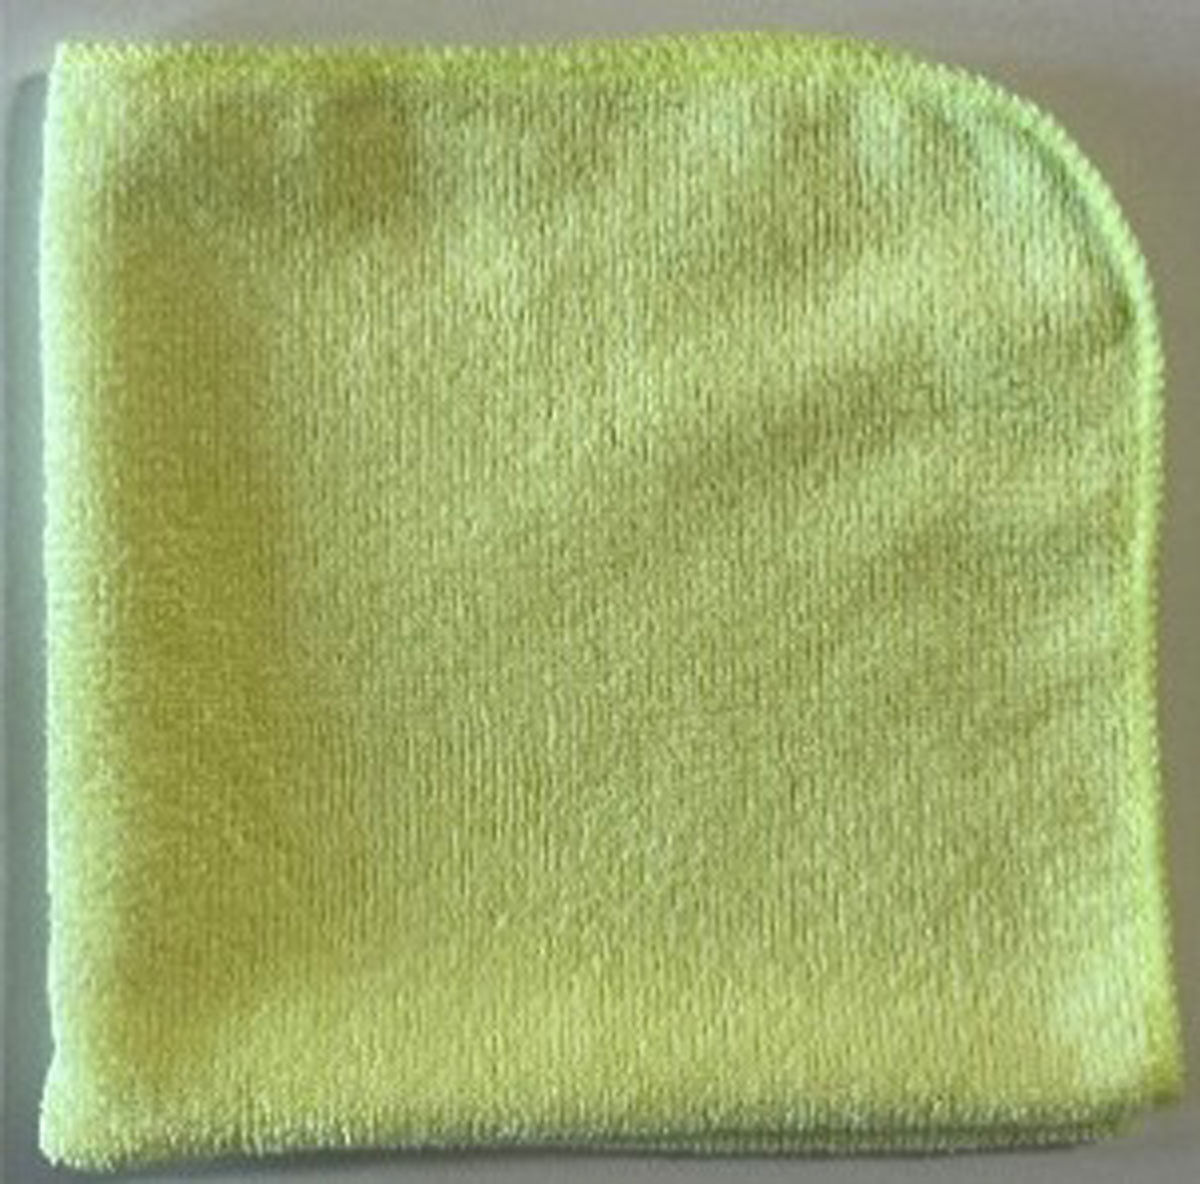 Are these Microfiber cleaning cloths suitable for everyday cleaning?